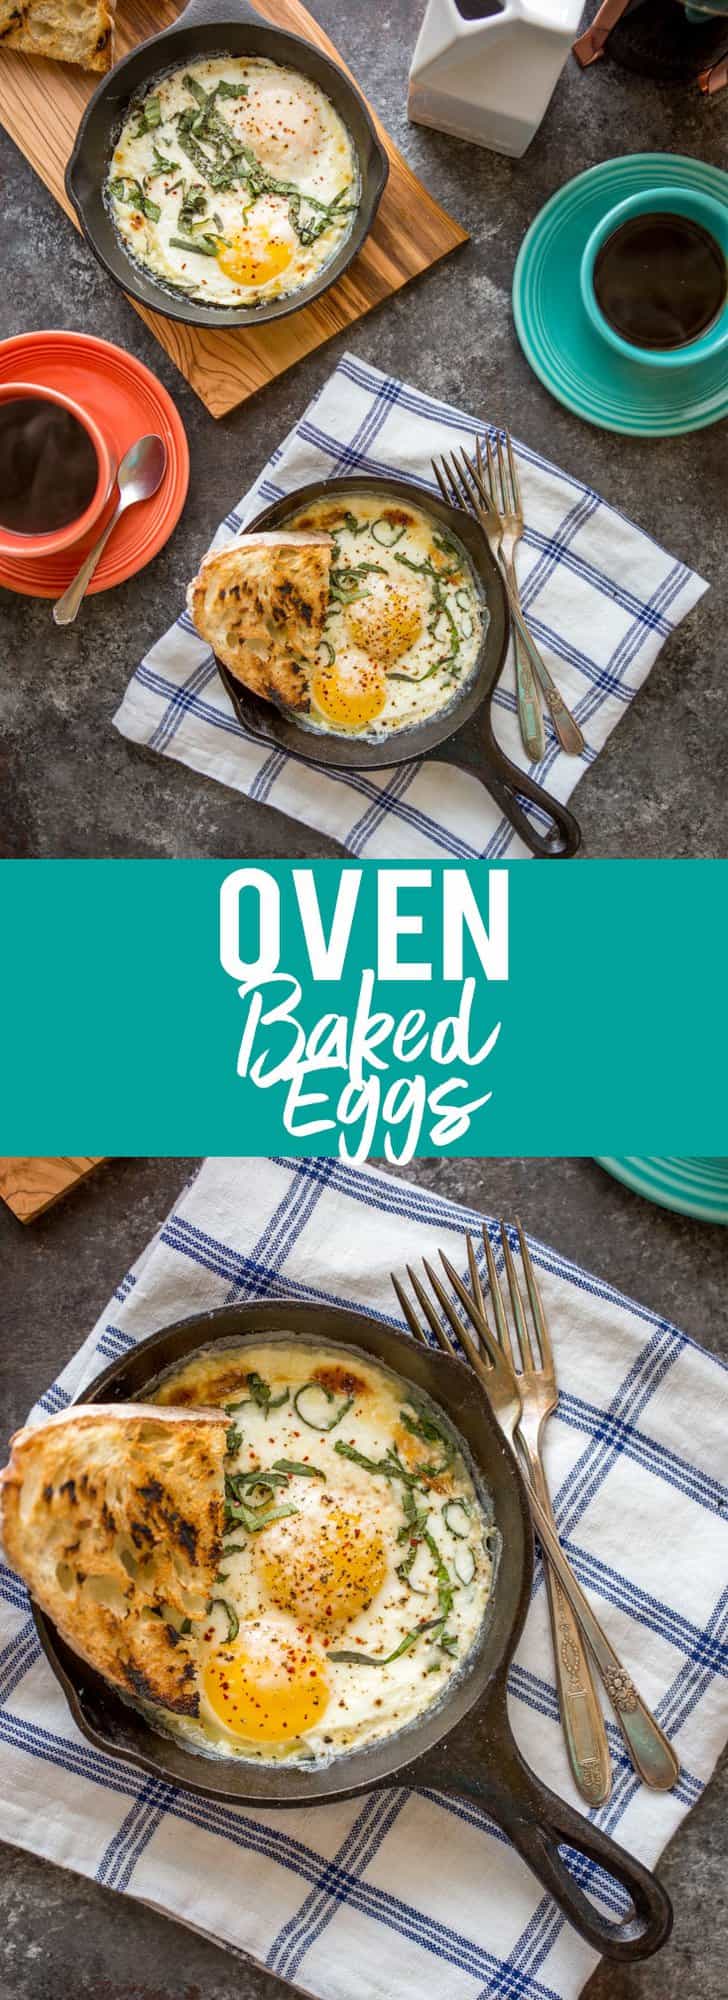 These oven baked eggs make the perfect weekend breakfast or brunch. This sophisticated and impressive egg dish is perfect for a crowd, or for just one or two people. | baked eggs | Brunch Recipes | Breakfast Recipes | egg Recipe